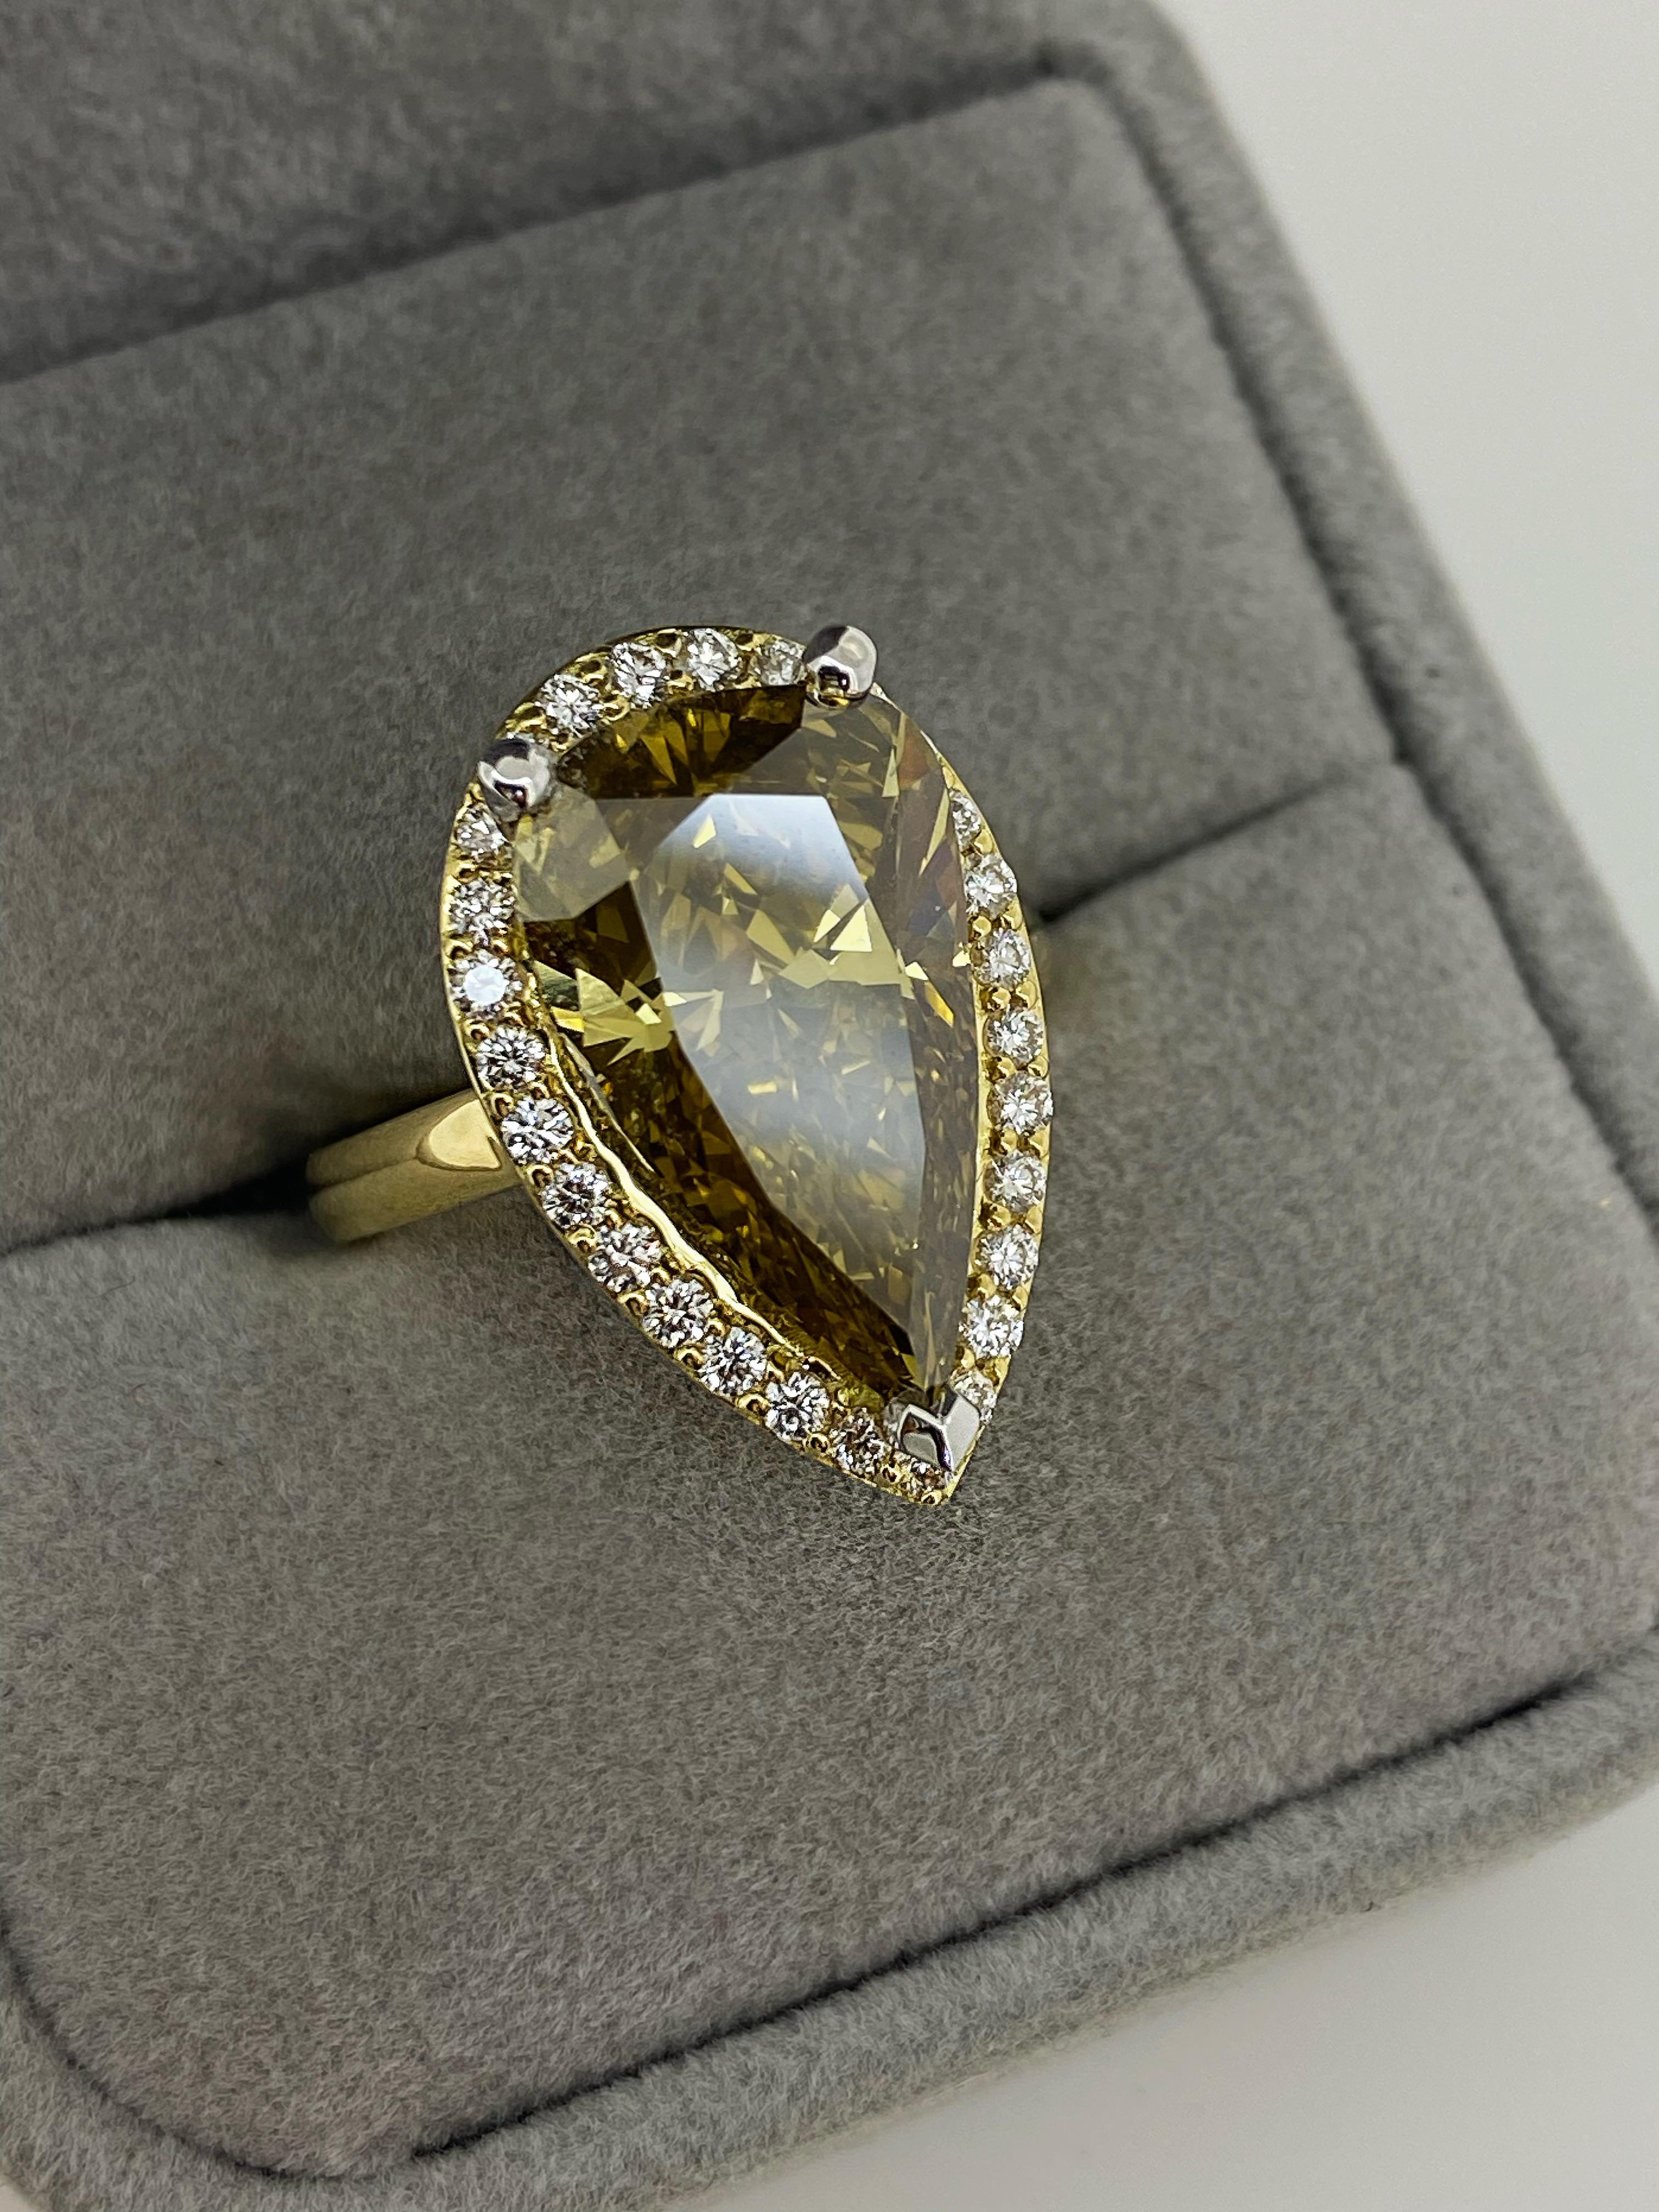 6.36ct Fancy Brownish Yellow Natural Pear Cut Diamond Ring in 18K Yellow Gold For Sale 5